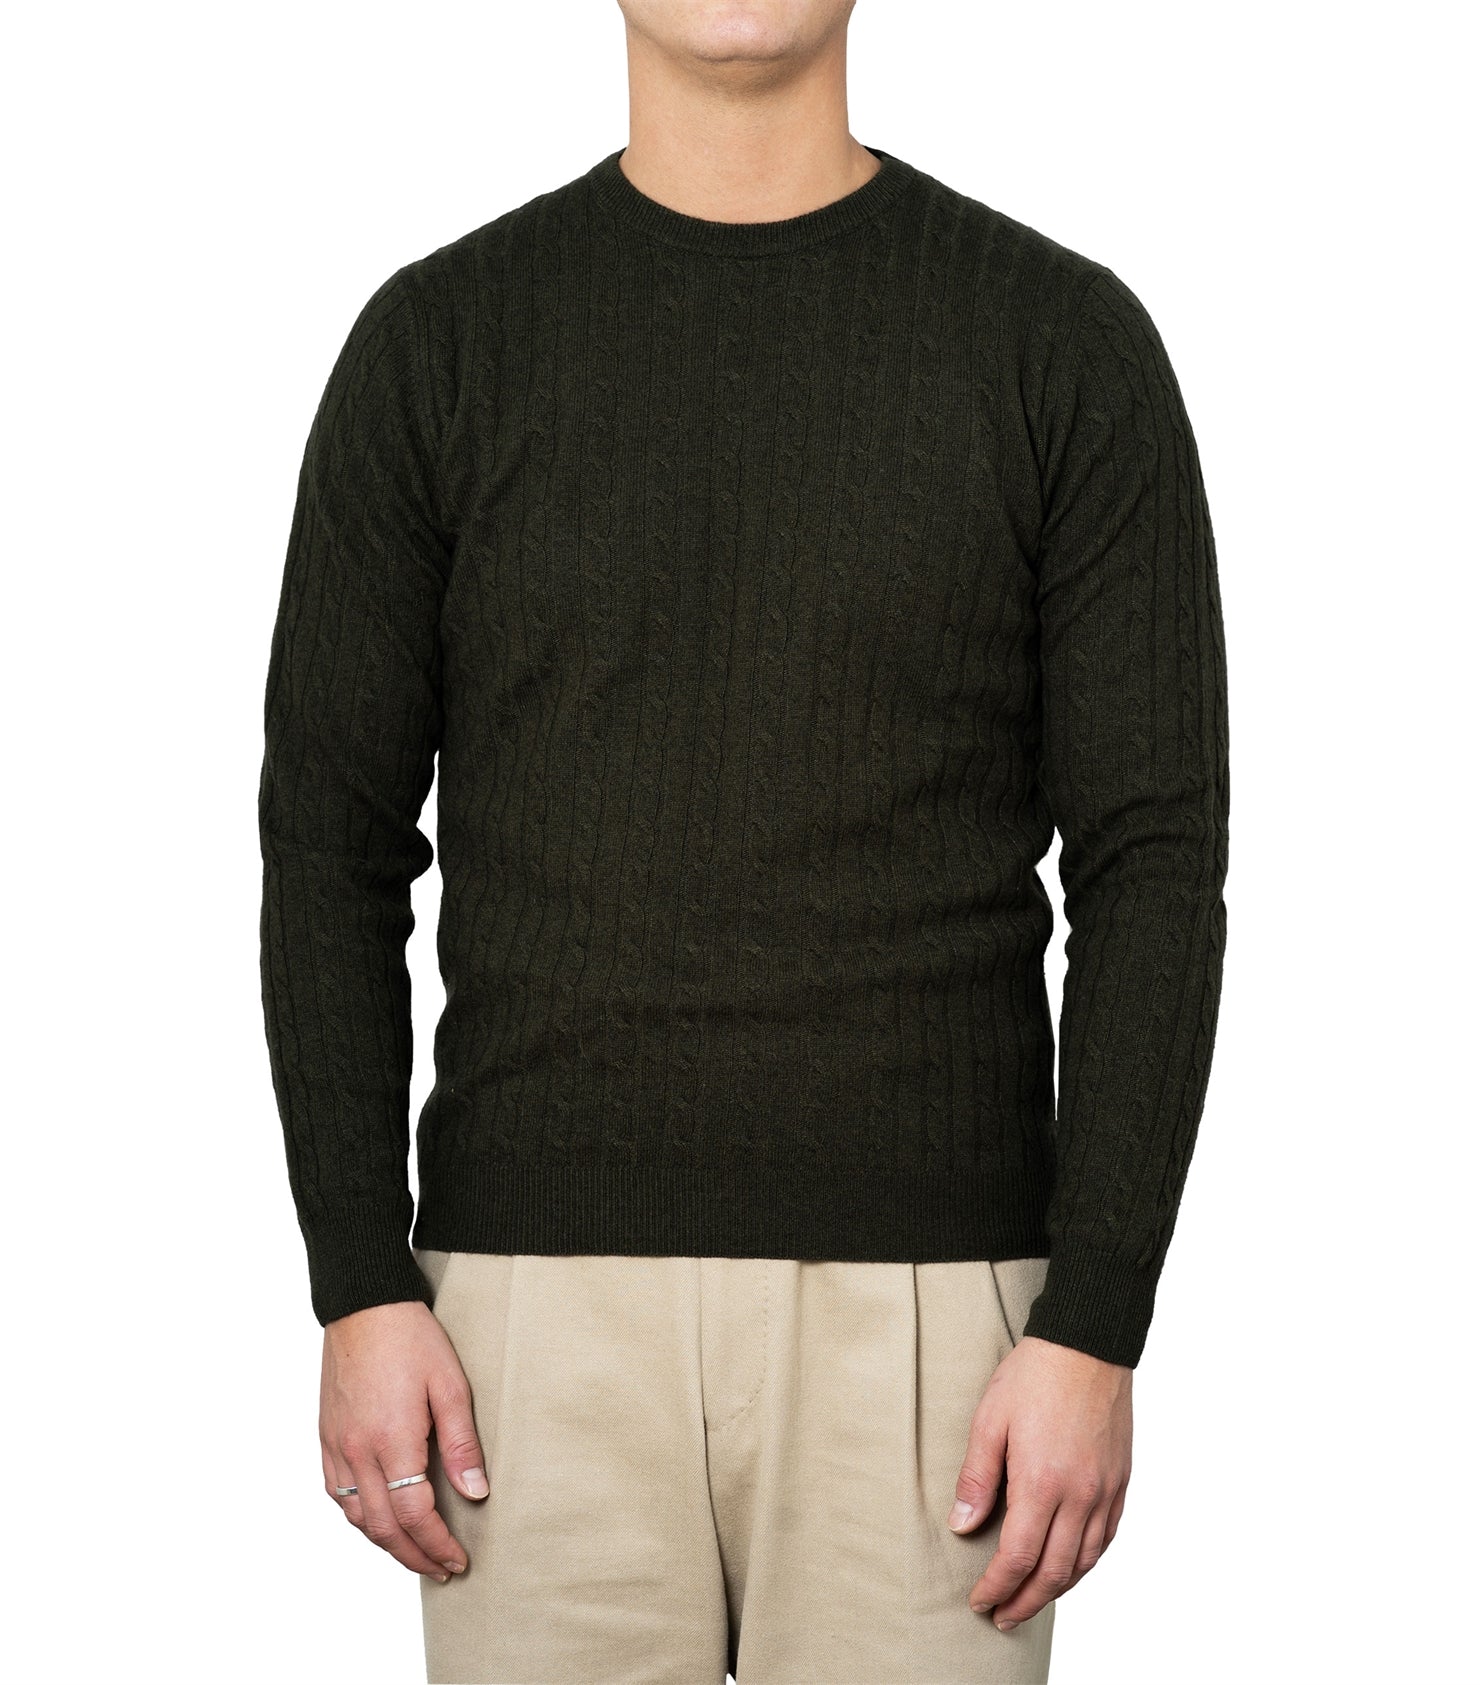 Enar Green Cable Knit Sweater